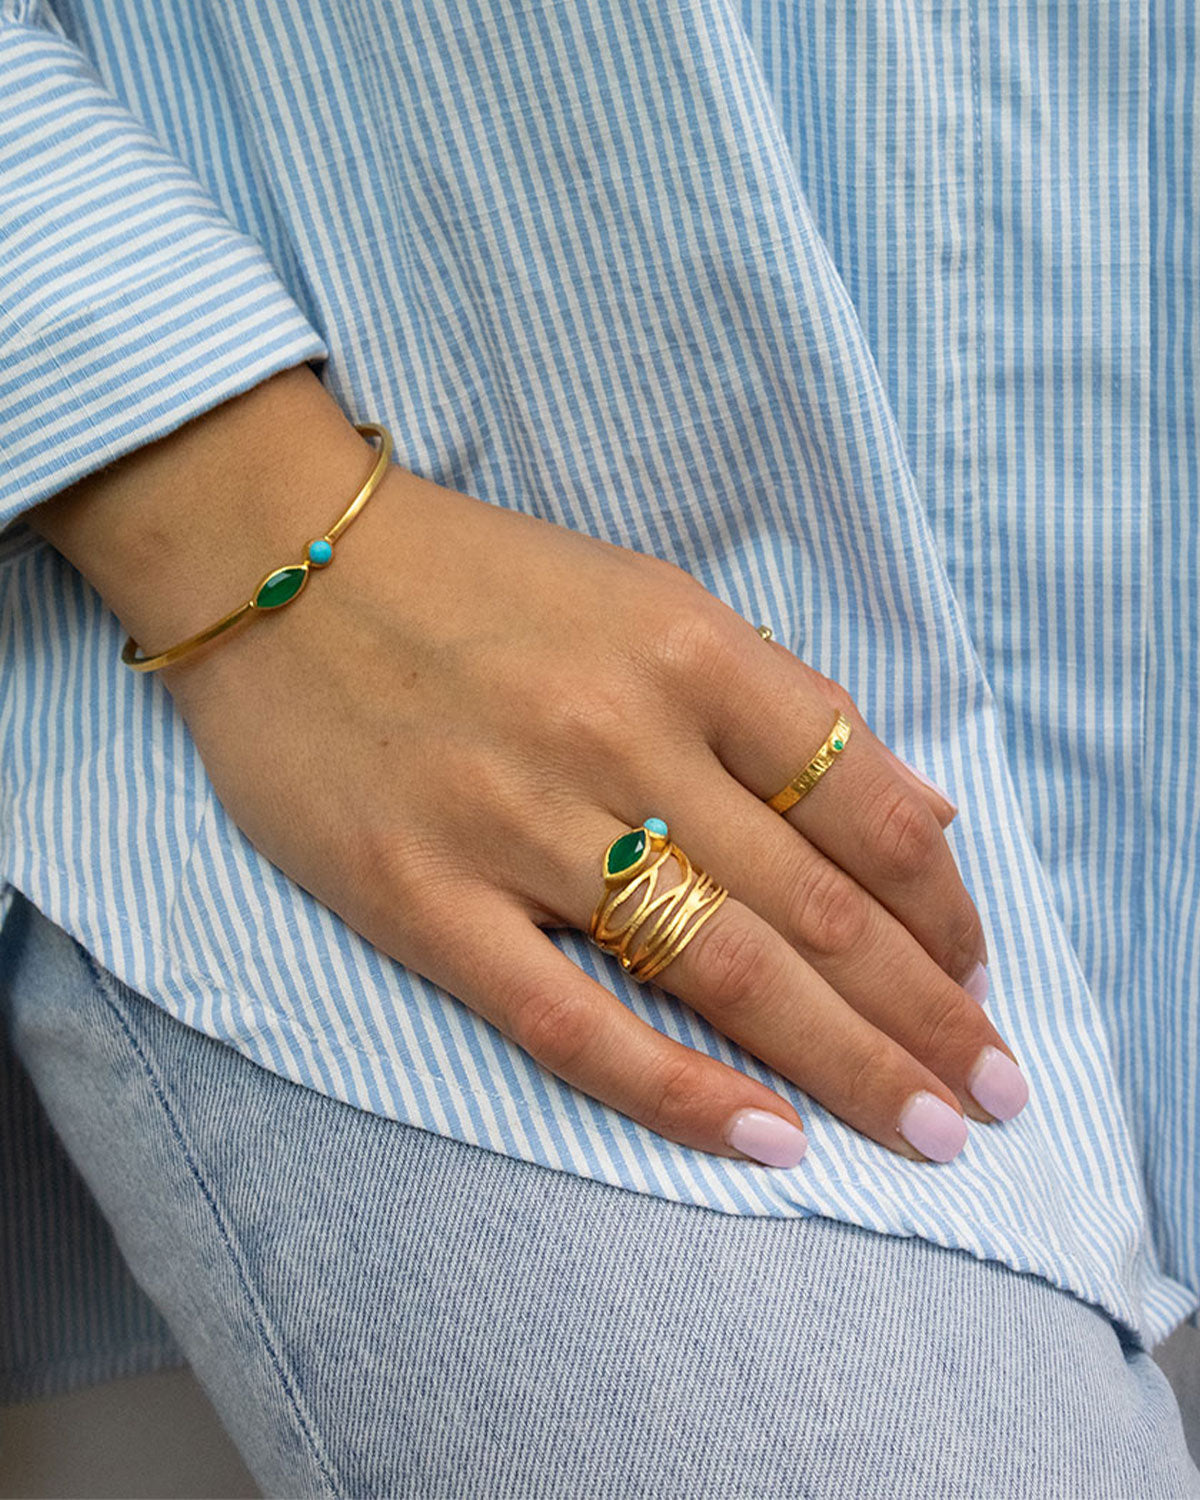 The ‘Euphorie’ Green Onyx & Turquoise Silver Bangels - Moon London